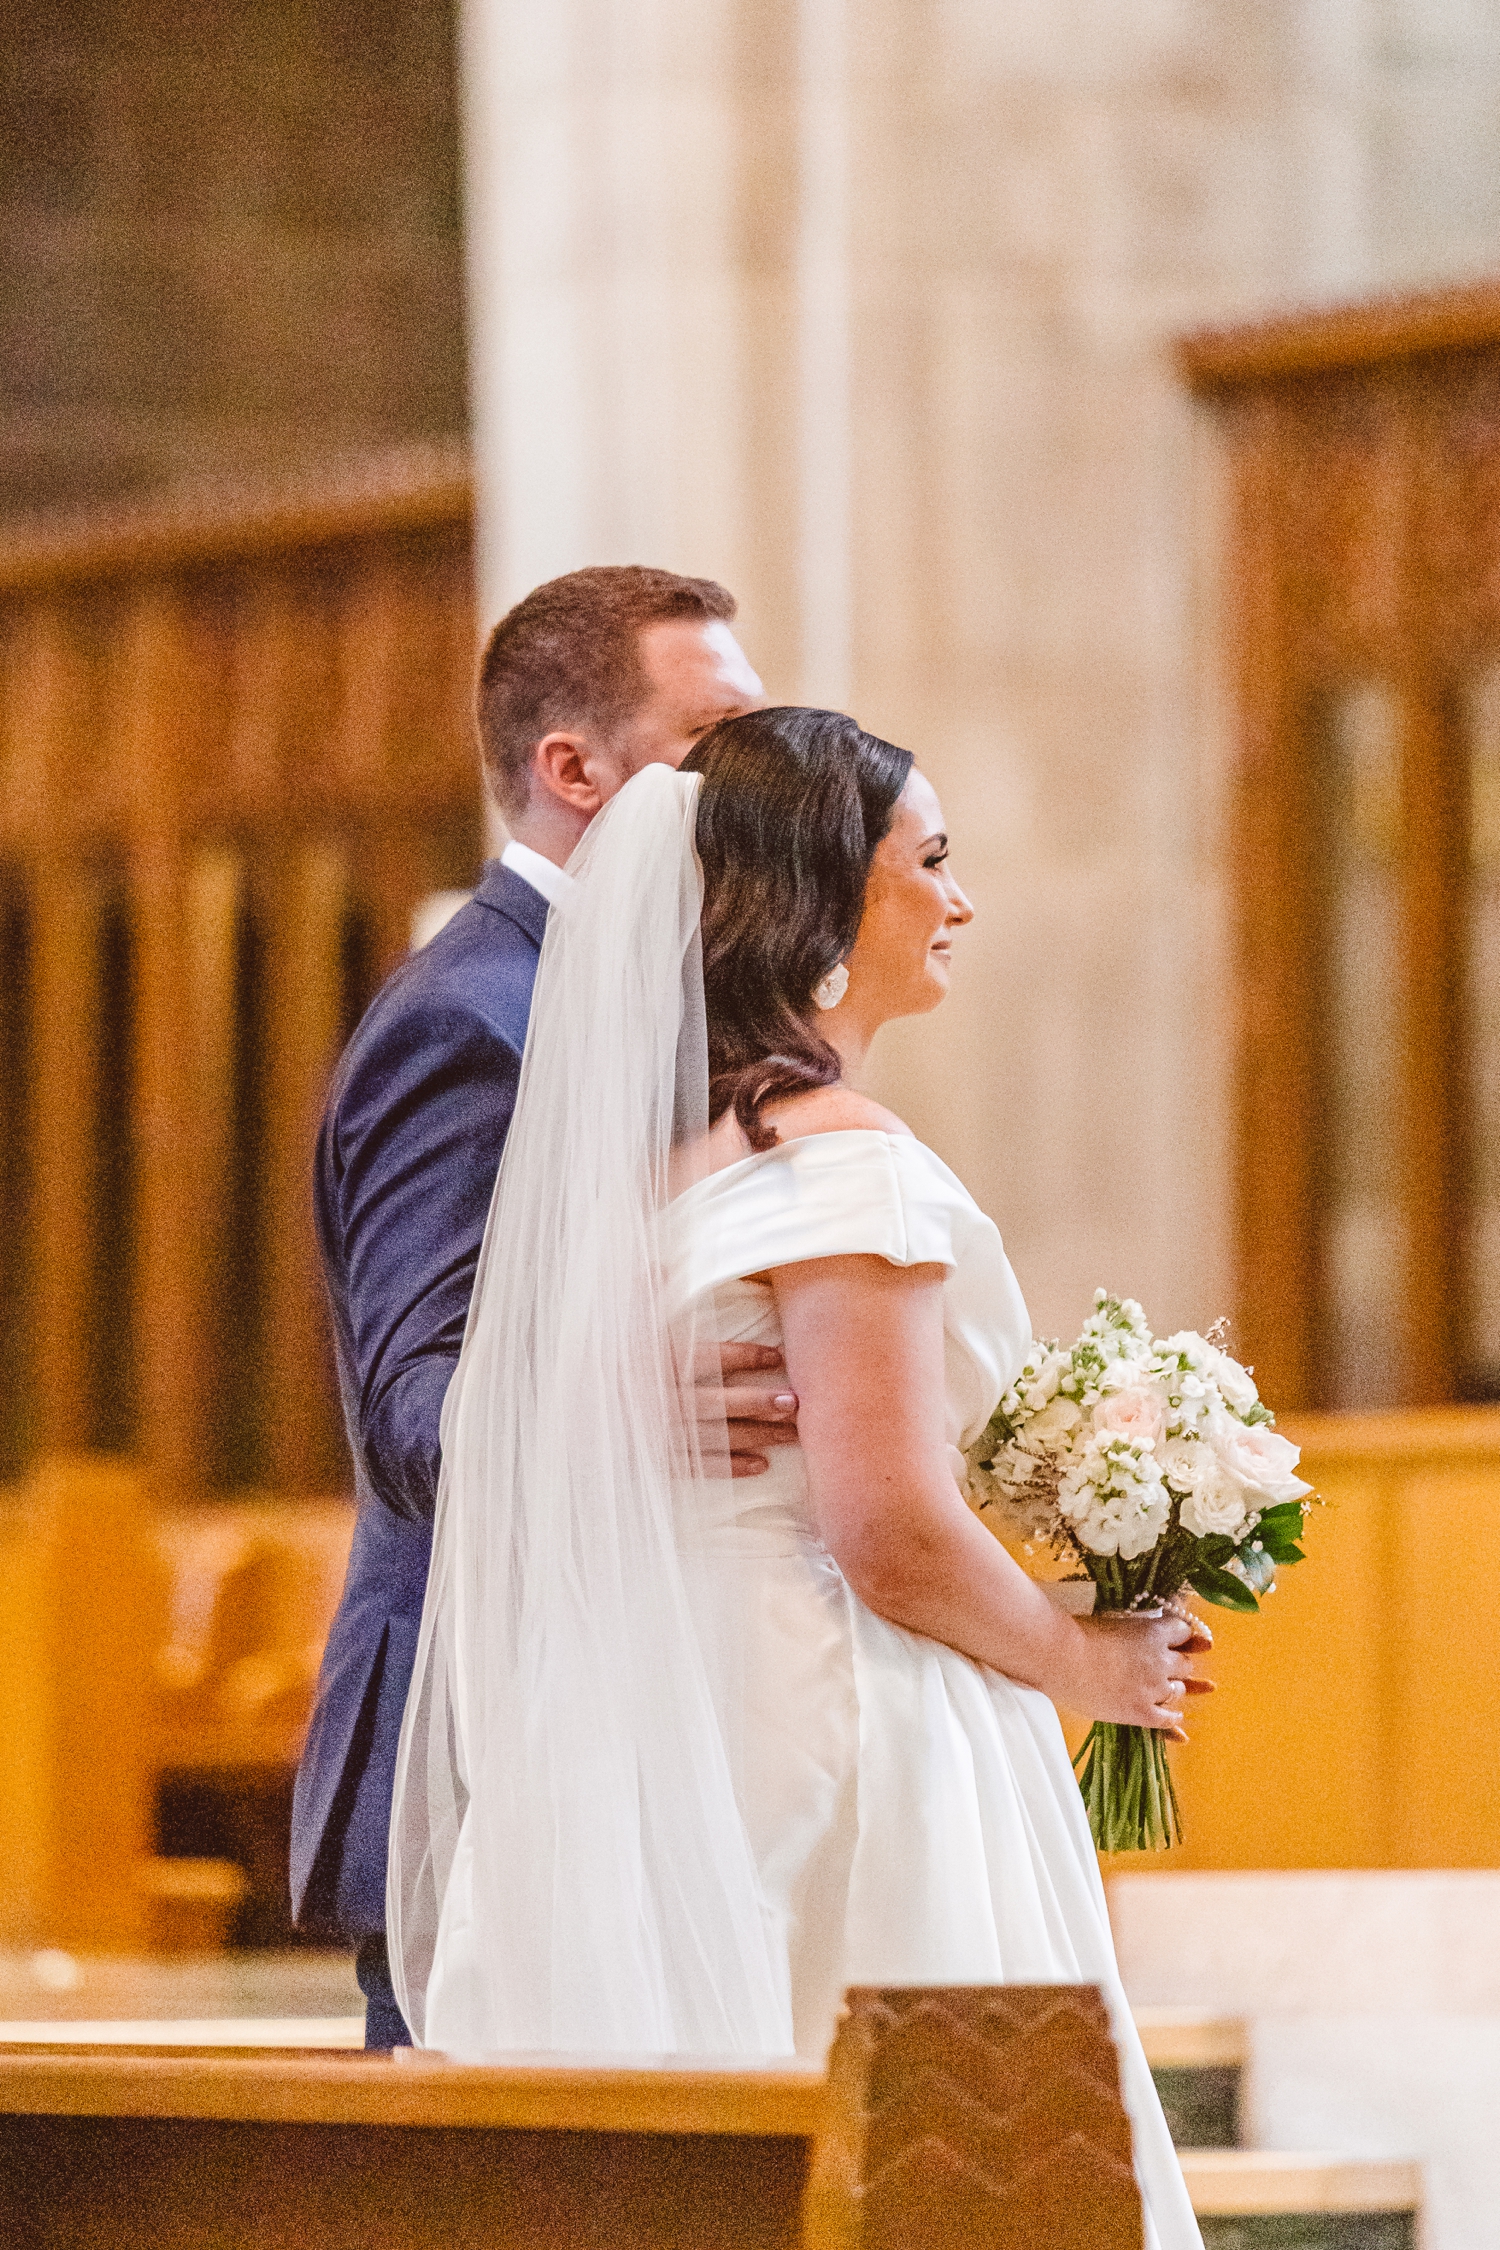 Bride and groom standing at altar at Cathedral of Mary Our Queen | Brooke Michelle Photo